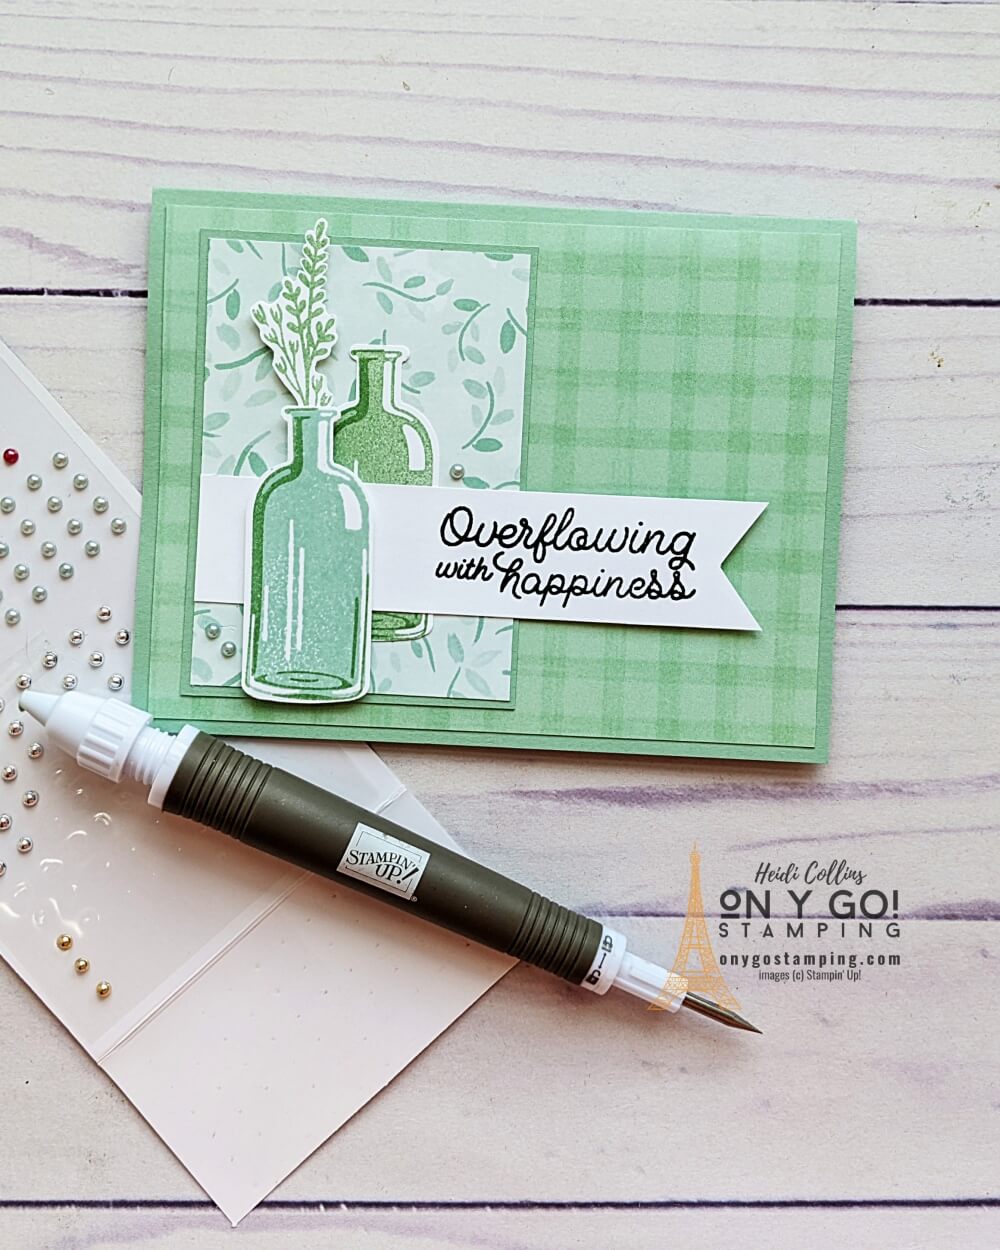 Easy handmade card using the Bottled Happiness stamp set from Stampin' Up!® based on a simple card sketch. Plus, get a free downloadable quick reference guide.